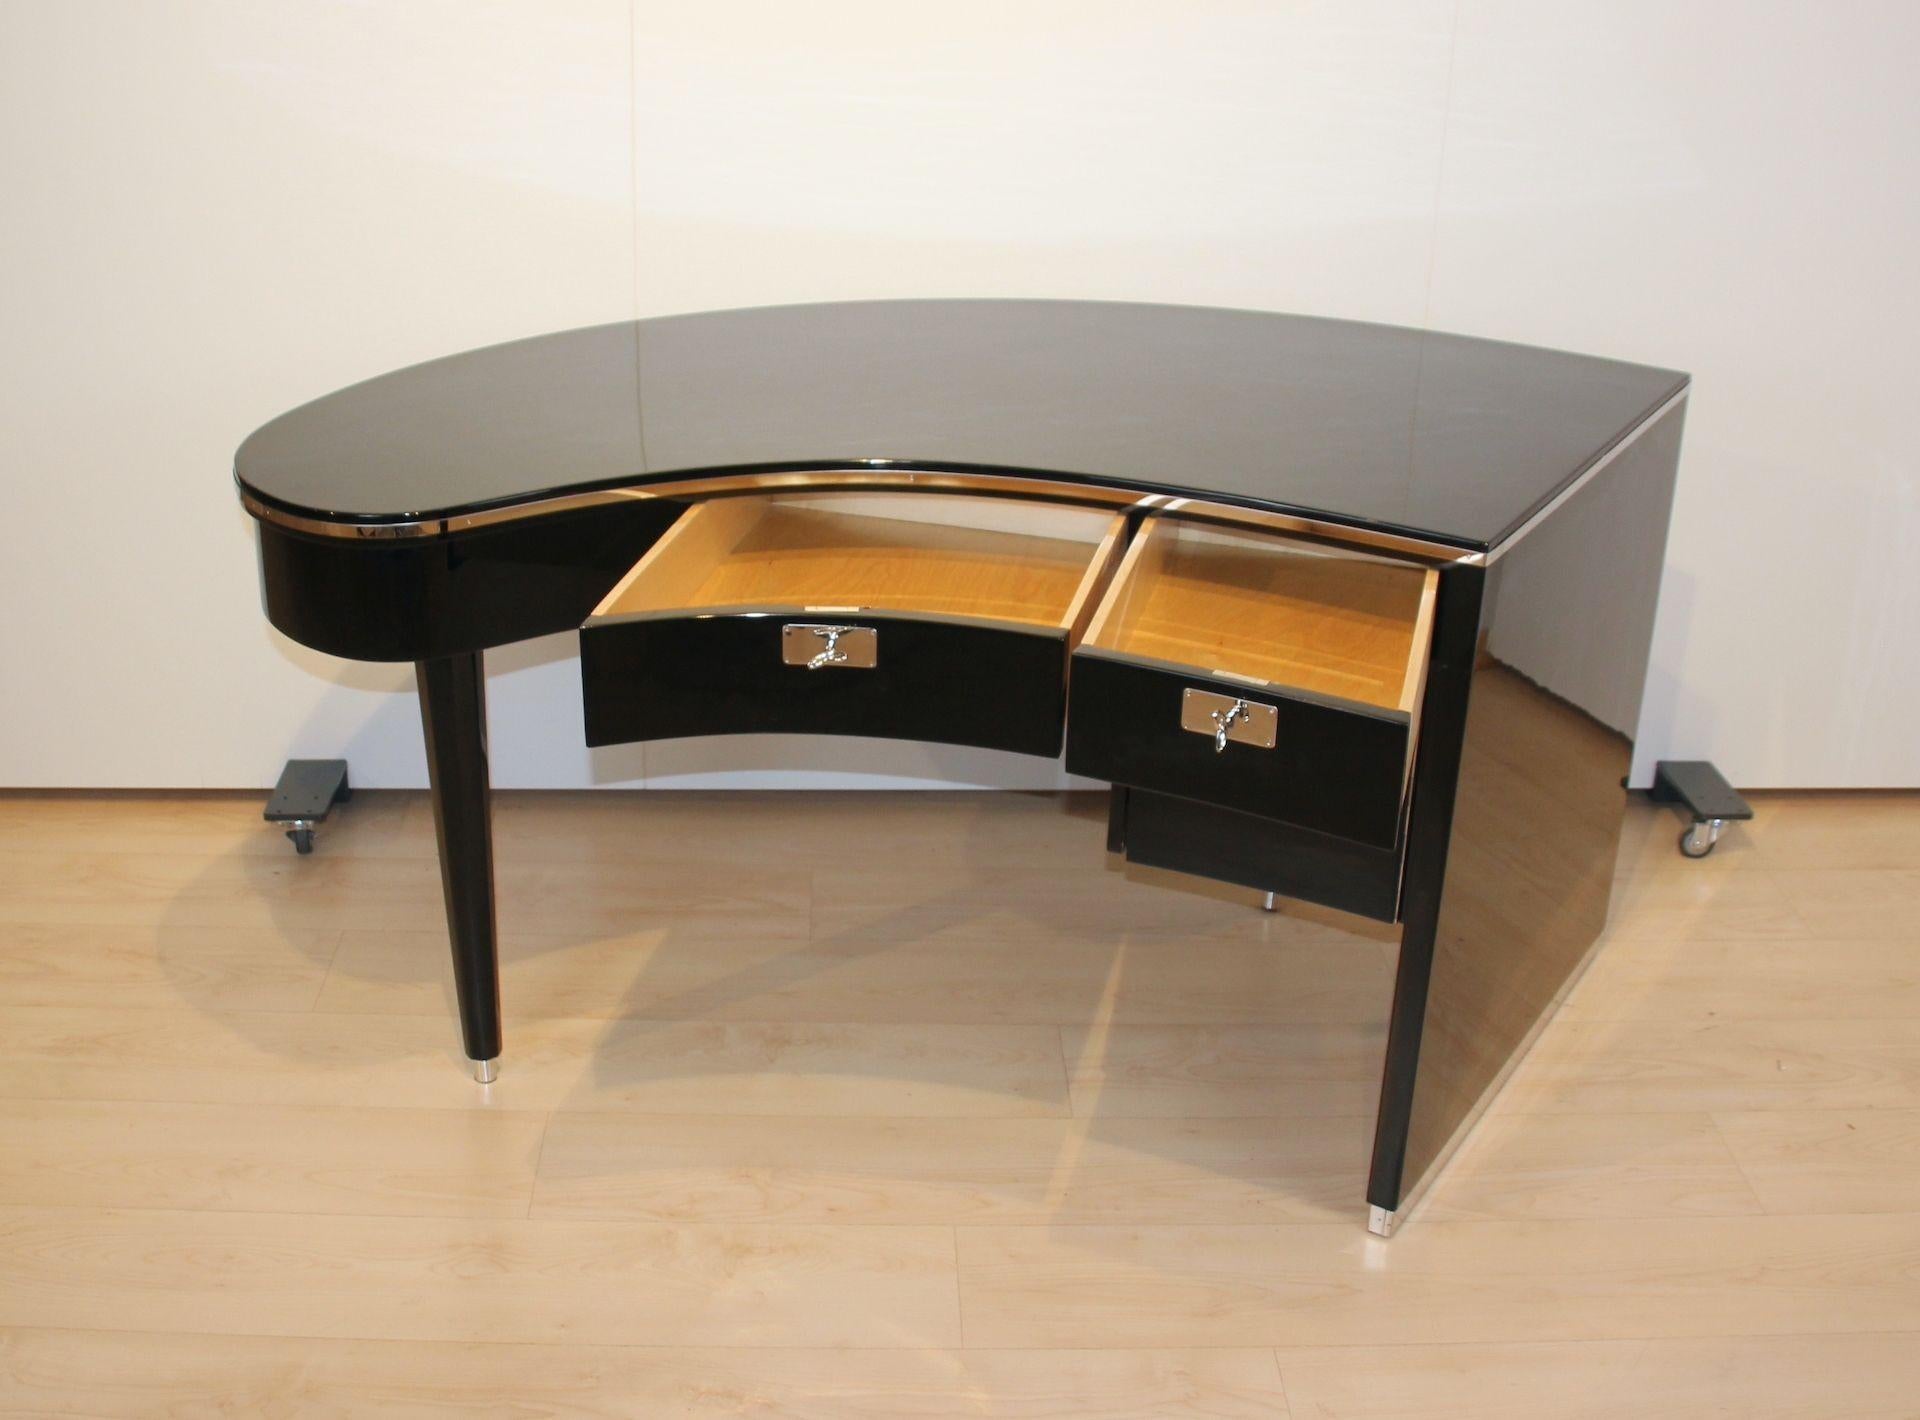 Design Desk, Curved Top, Piano Lacquer, Chrome, France, 1950s For Sale 5